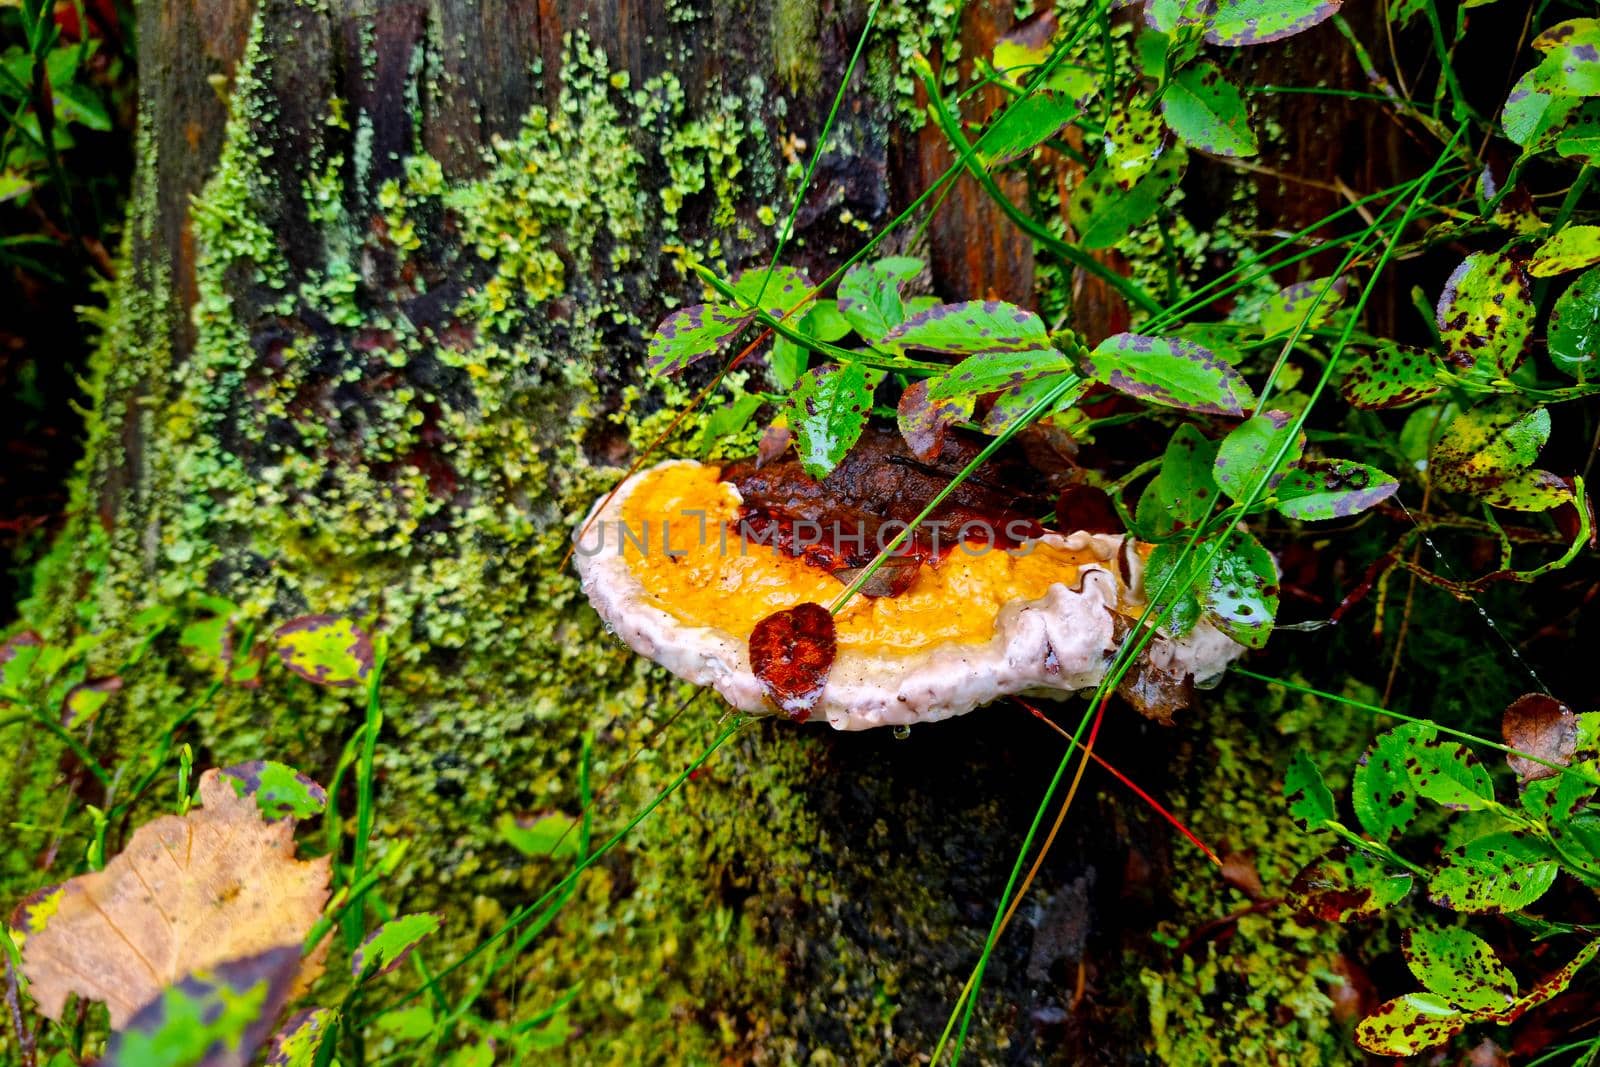 On the trunk of the tree grows a mushroom in the forest. by kip02kas